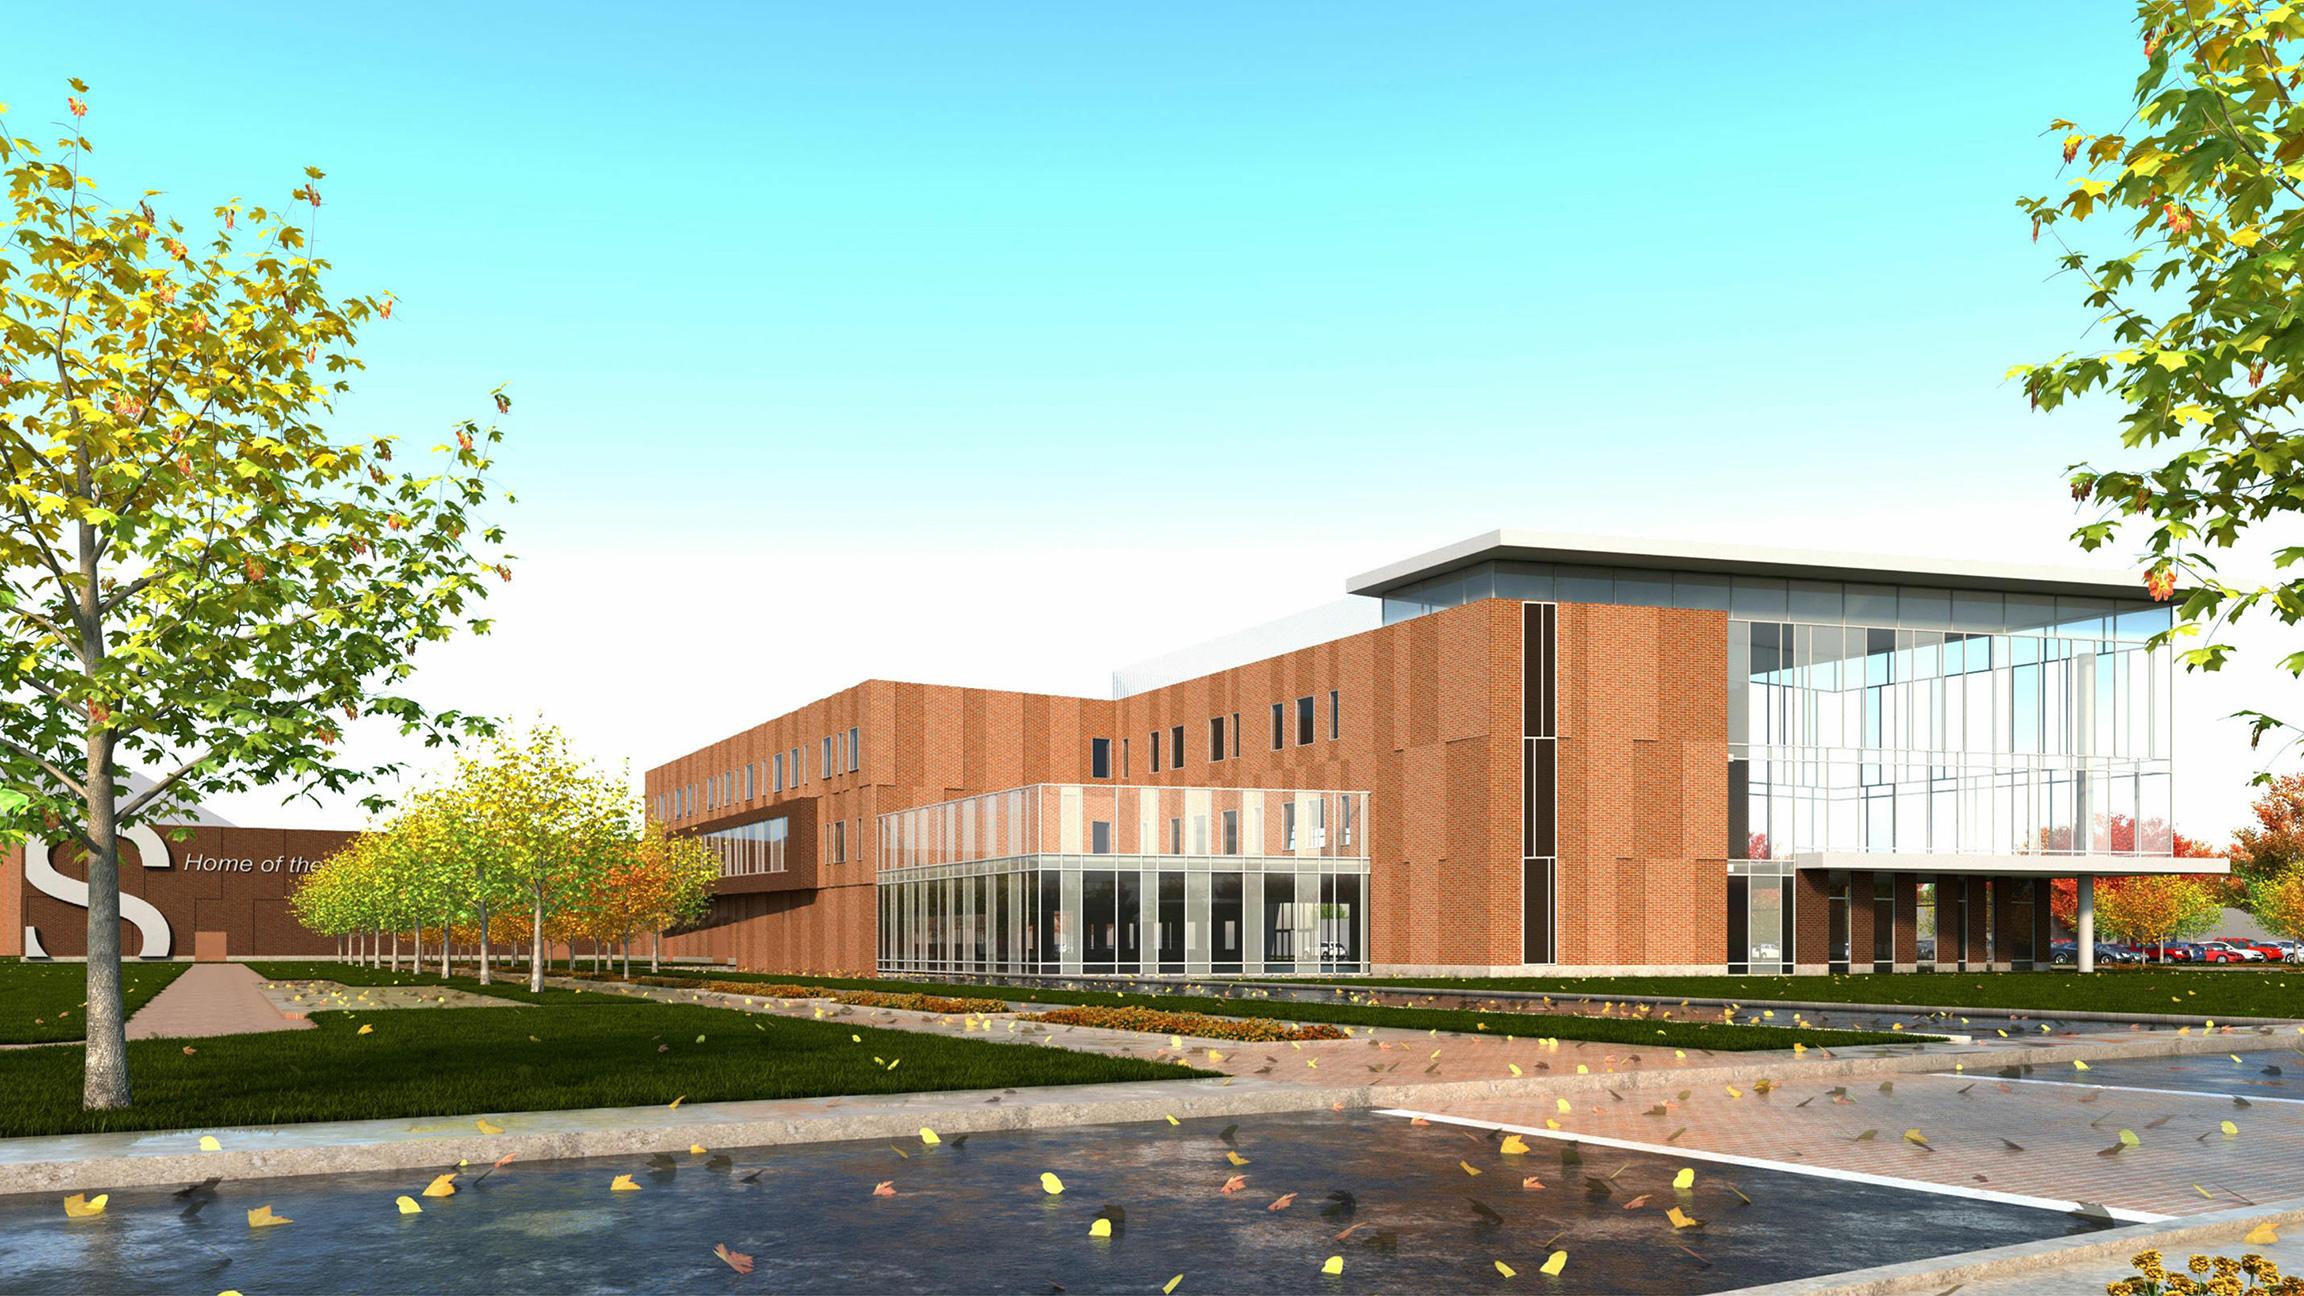 A rendering of the proposed new 1,200-student Englewood high school building. (Chicago Public Schools)